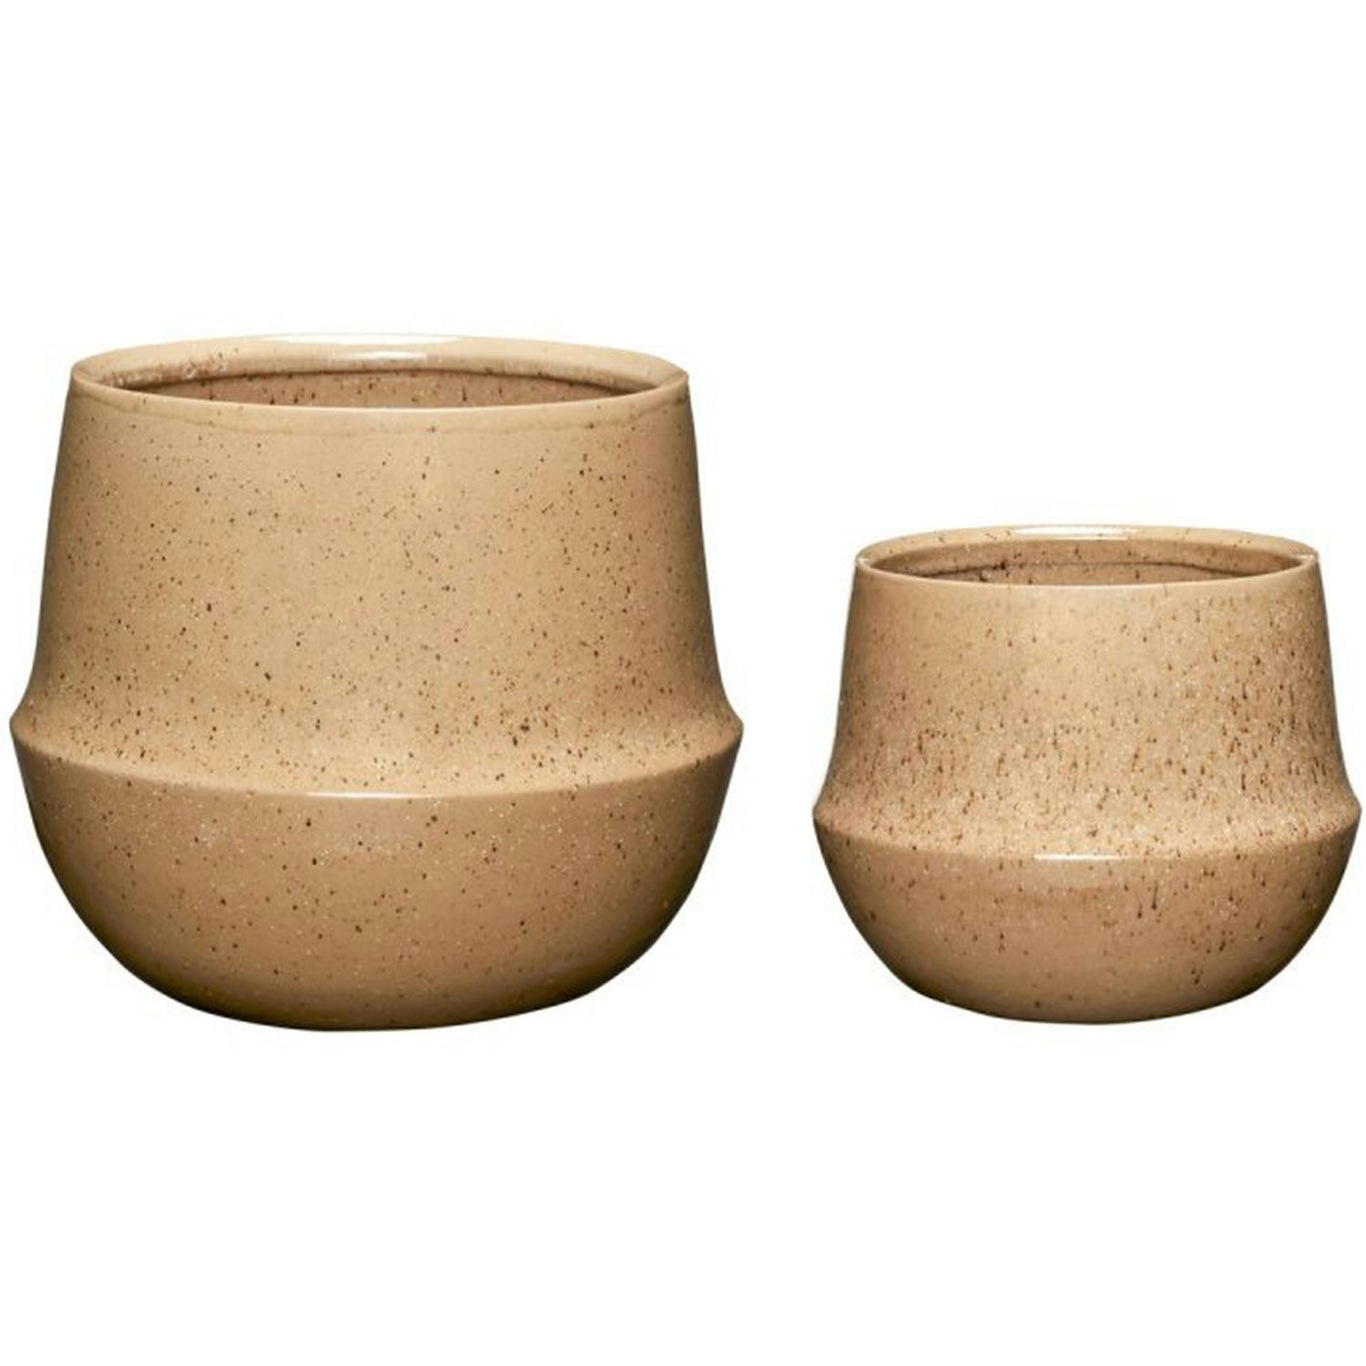 Vibe Planters 2-pack, Sand